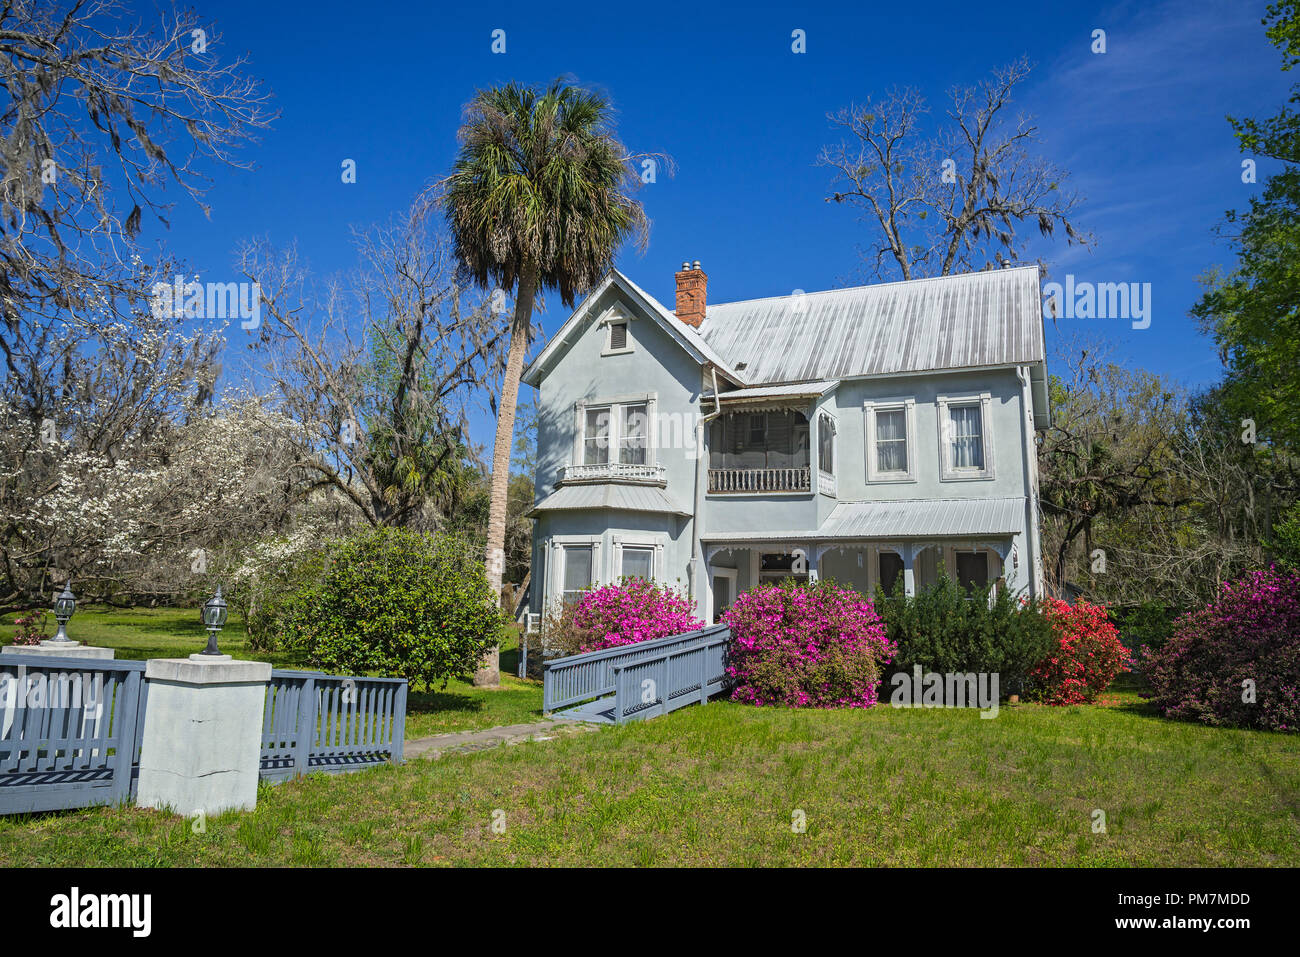 Old wooden 2 story home in the small North Florida town of Fort White. Stock Photo